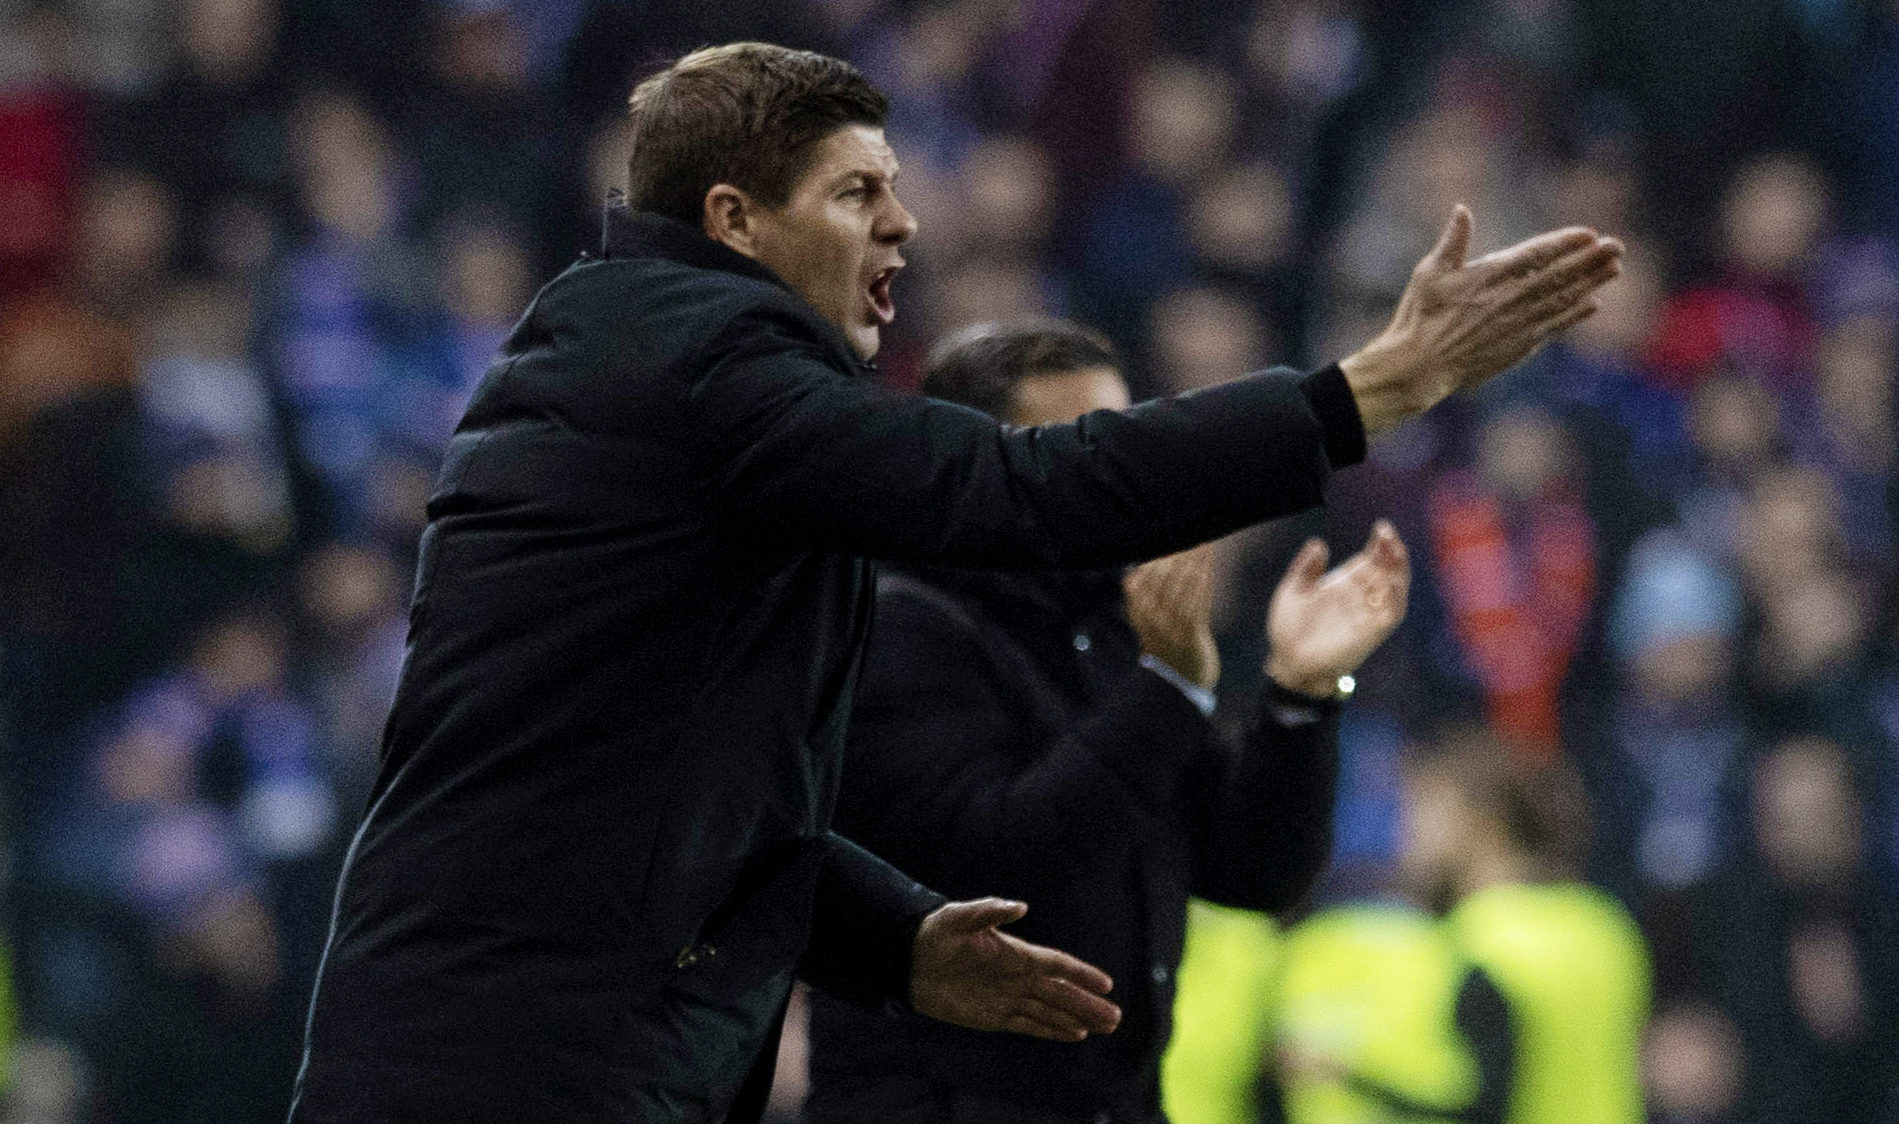 Rangers manager Steven Gerrard shouts instructions to his players (SNS Group / Craig Williamson)